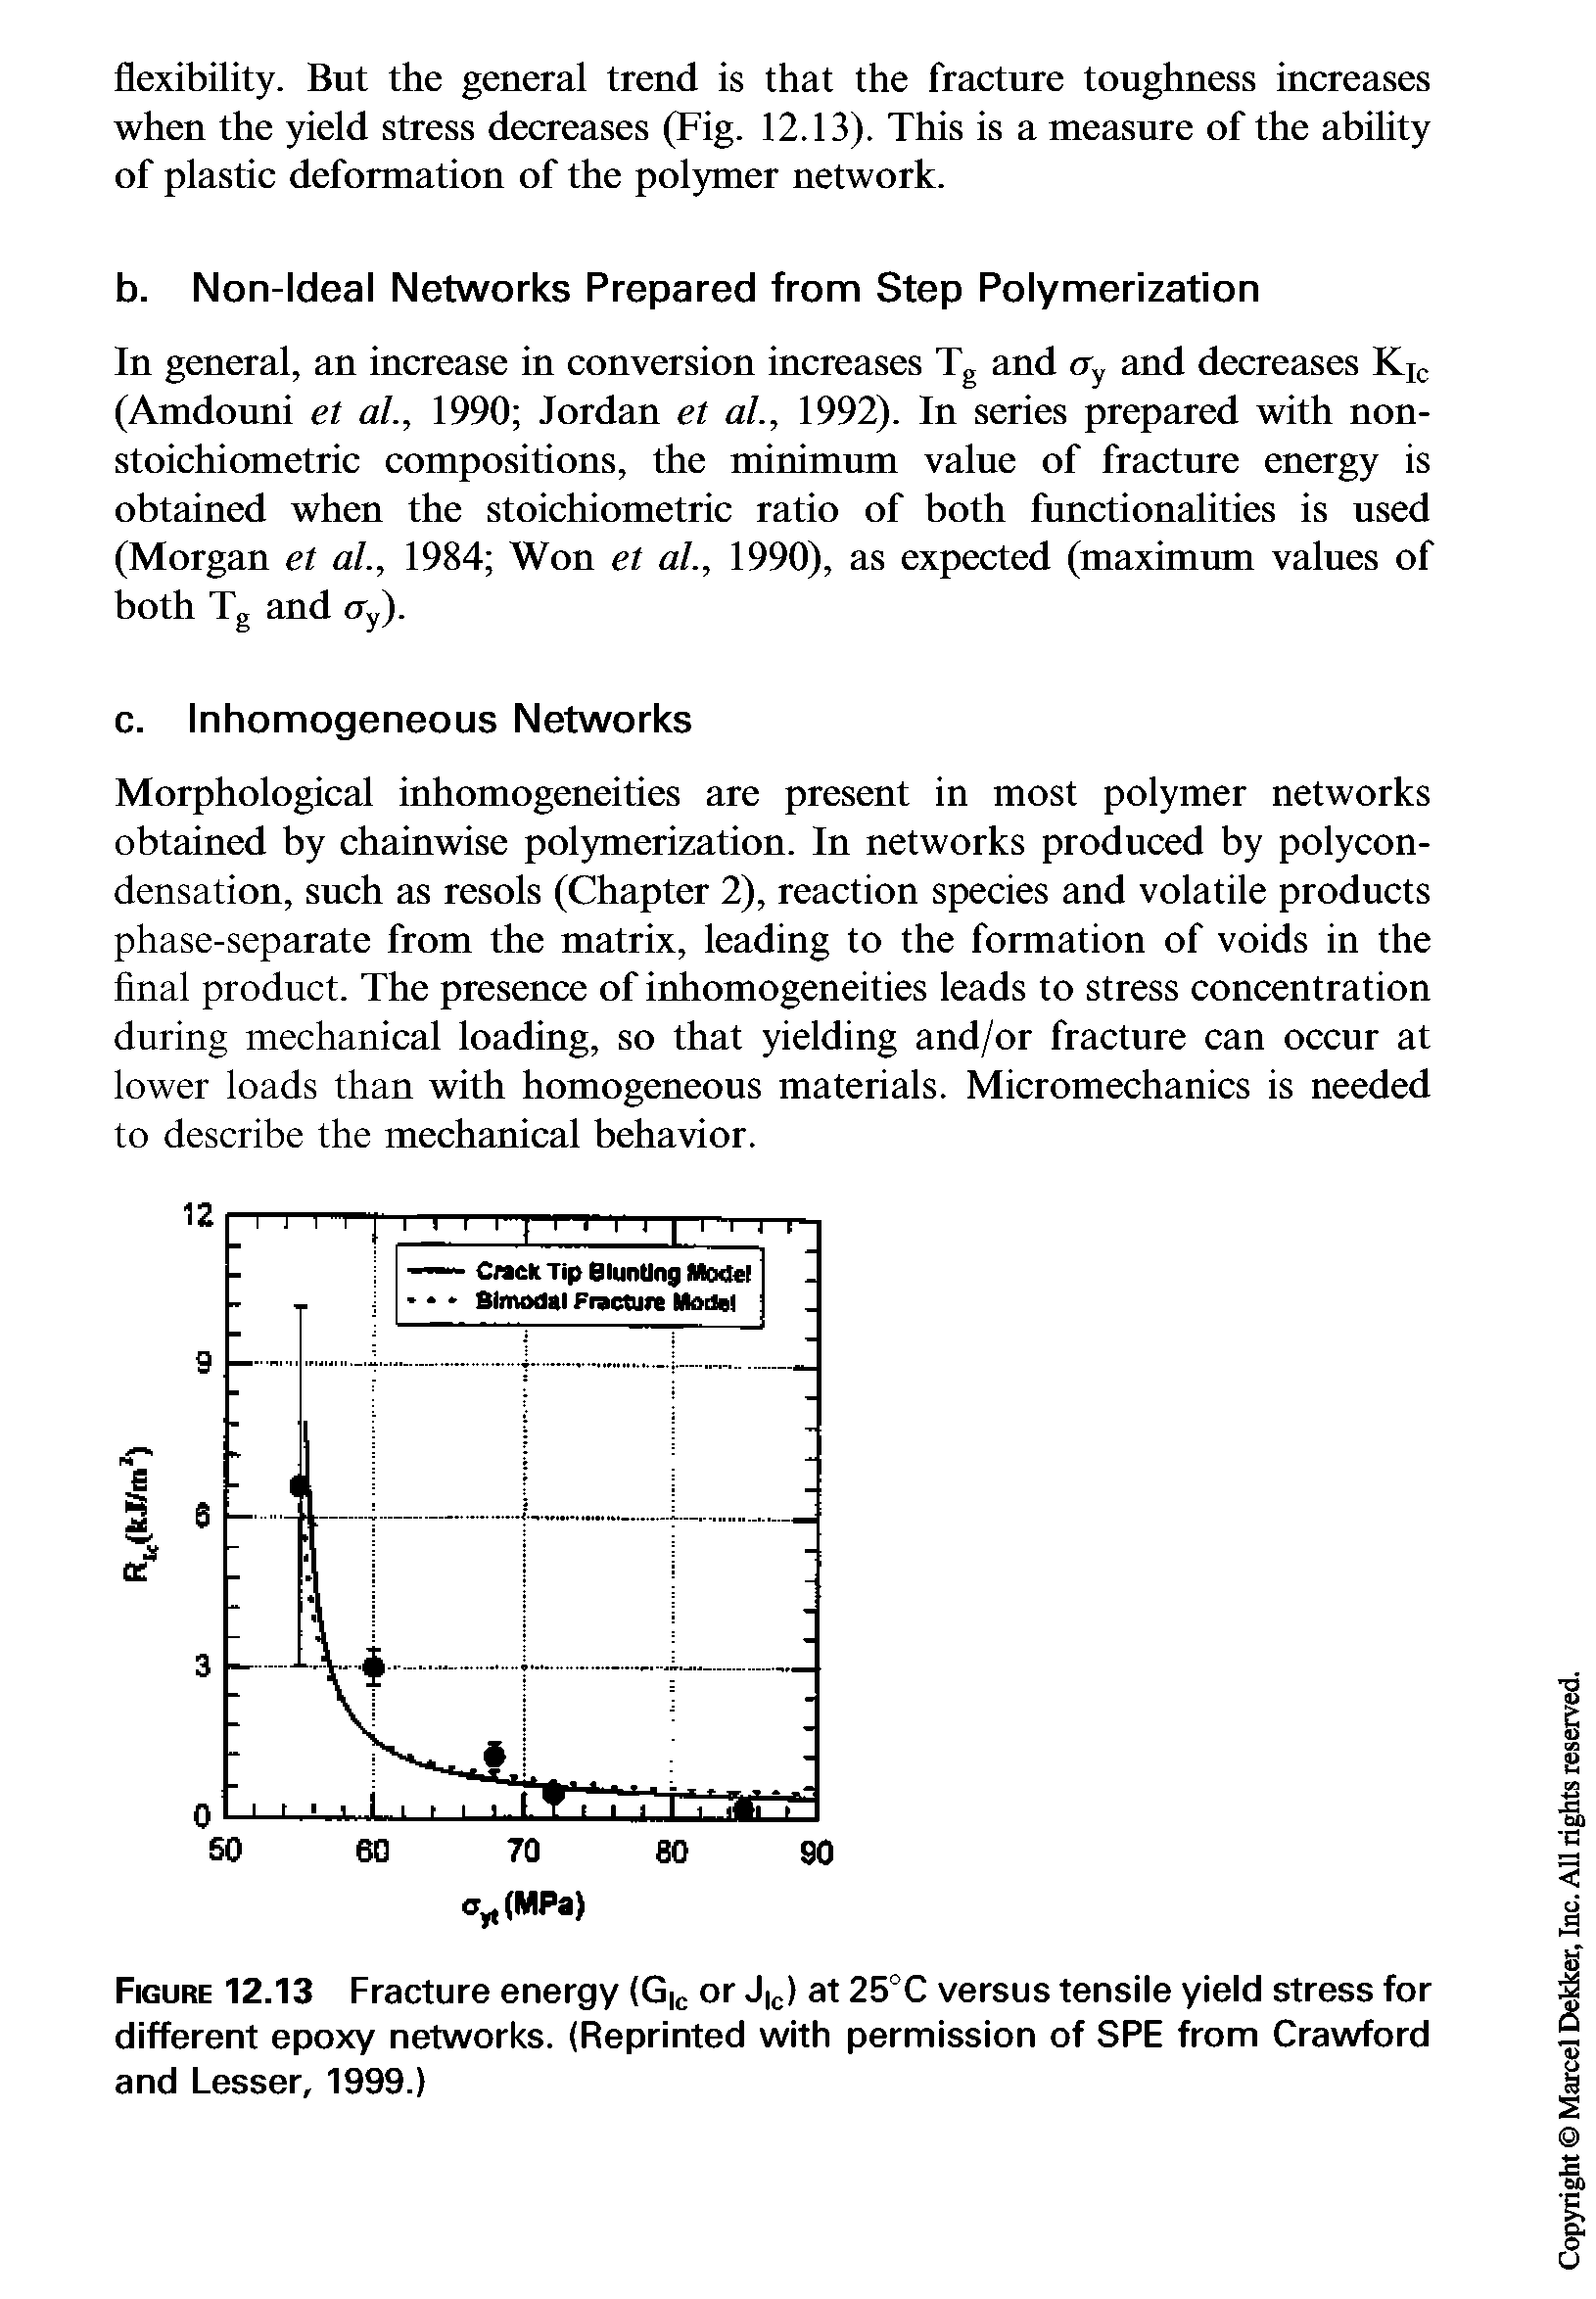 Figure 12.13 Fracture energy (G c or J C) at 25°C versus tensile yield stress for different epoxy networks. (Reprinted with permission of SPE from Crawford and Lesser, 1999.)...